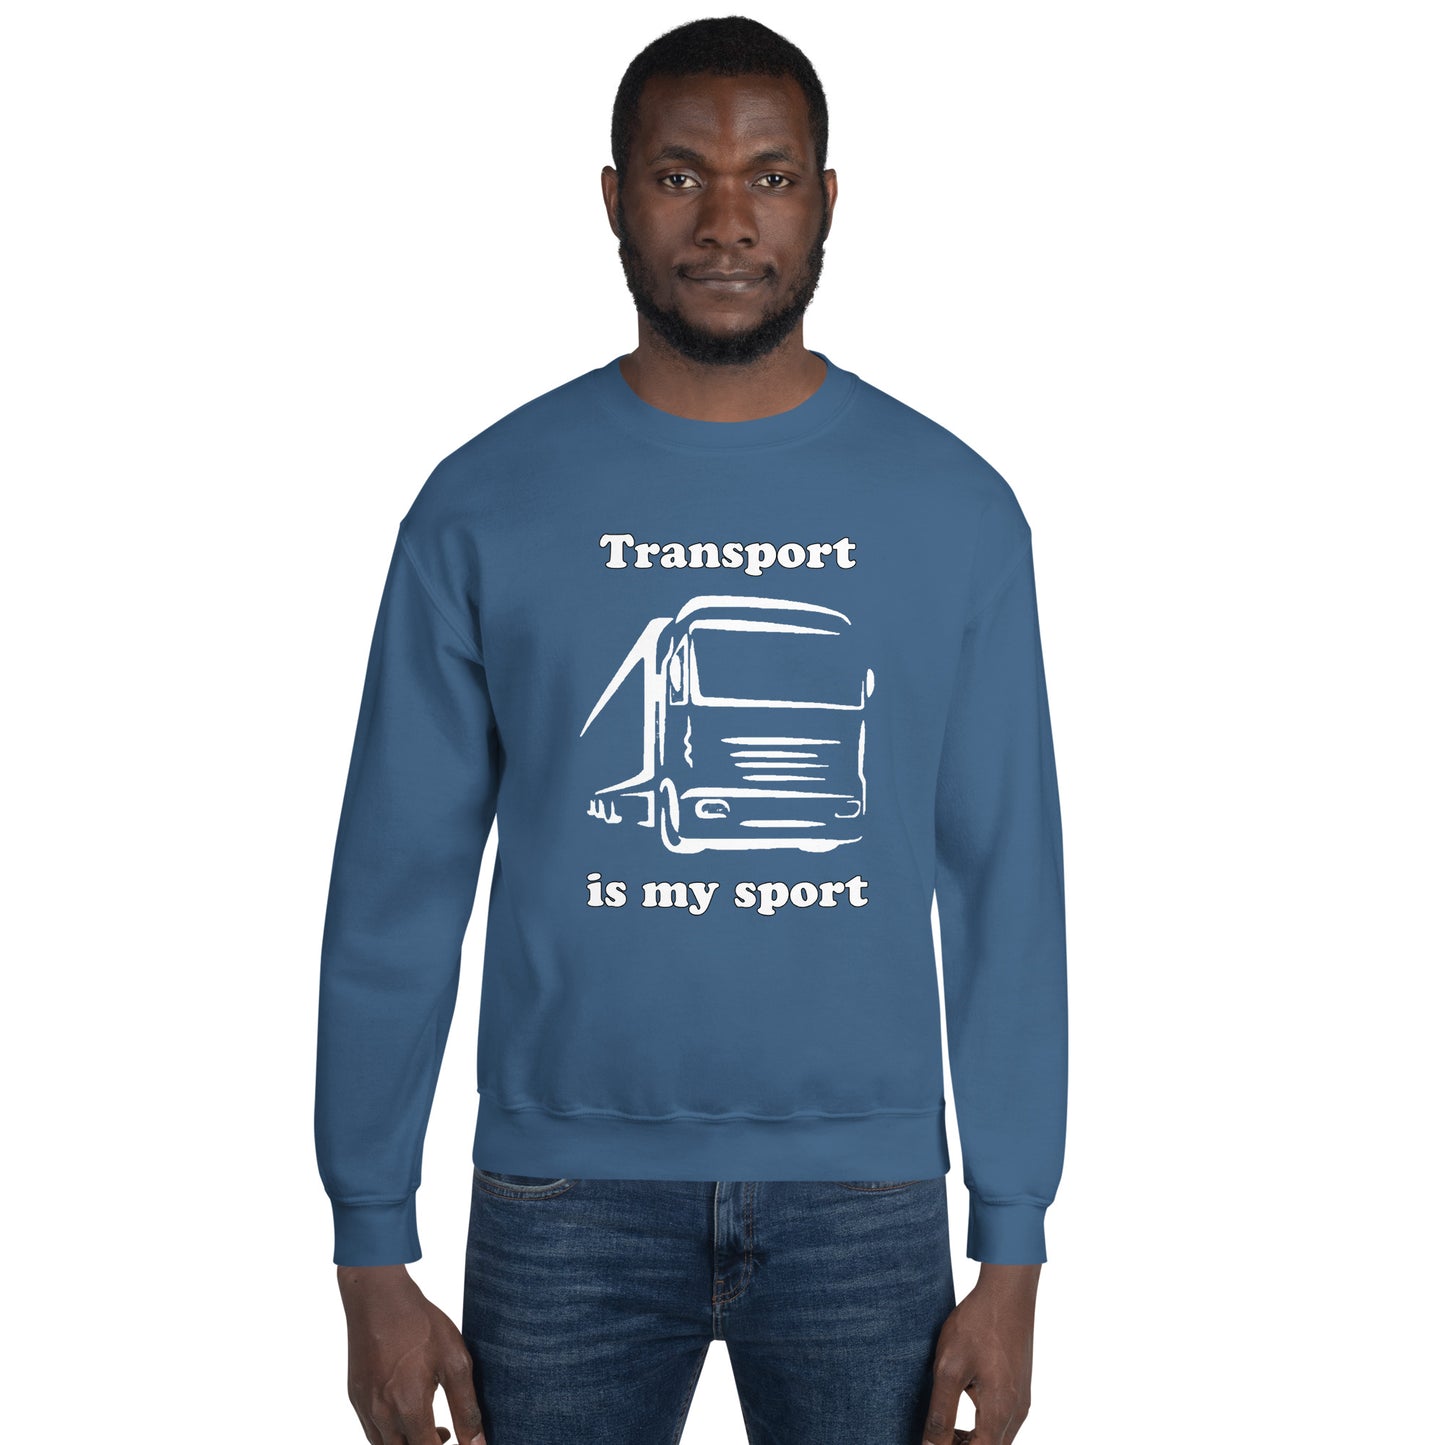 Man with indigo blue sweatshirt with picture of truck and text "Transport is my sport"